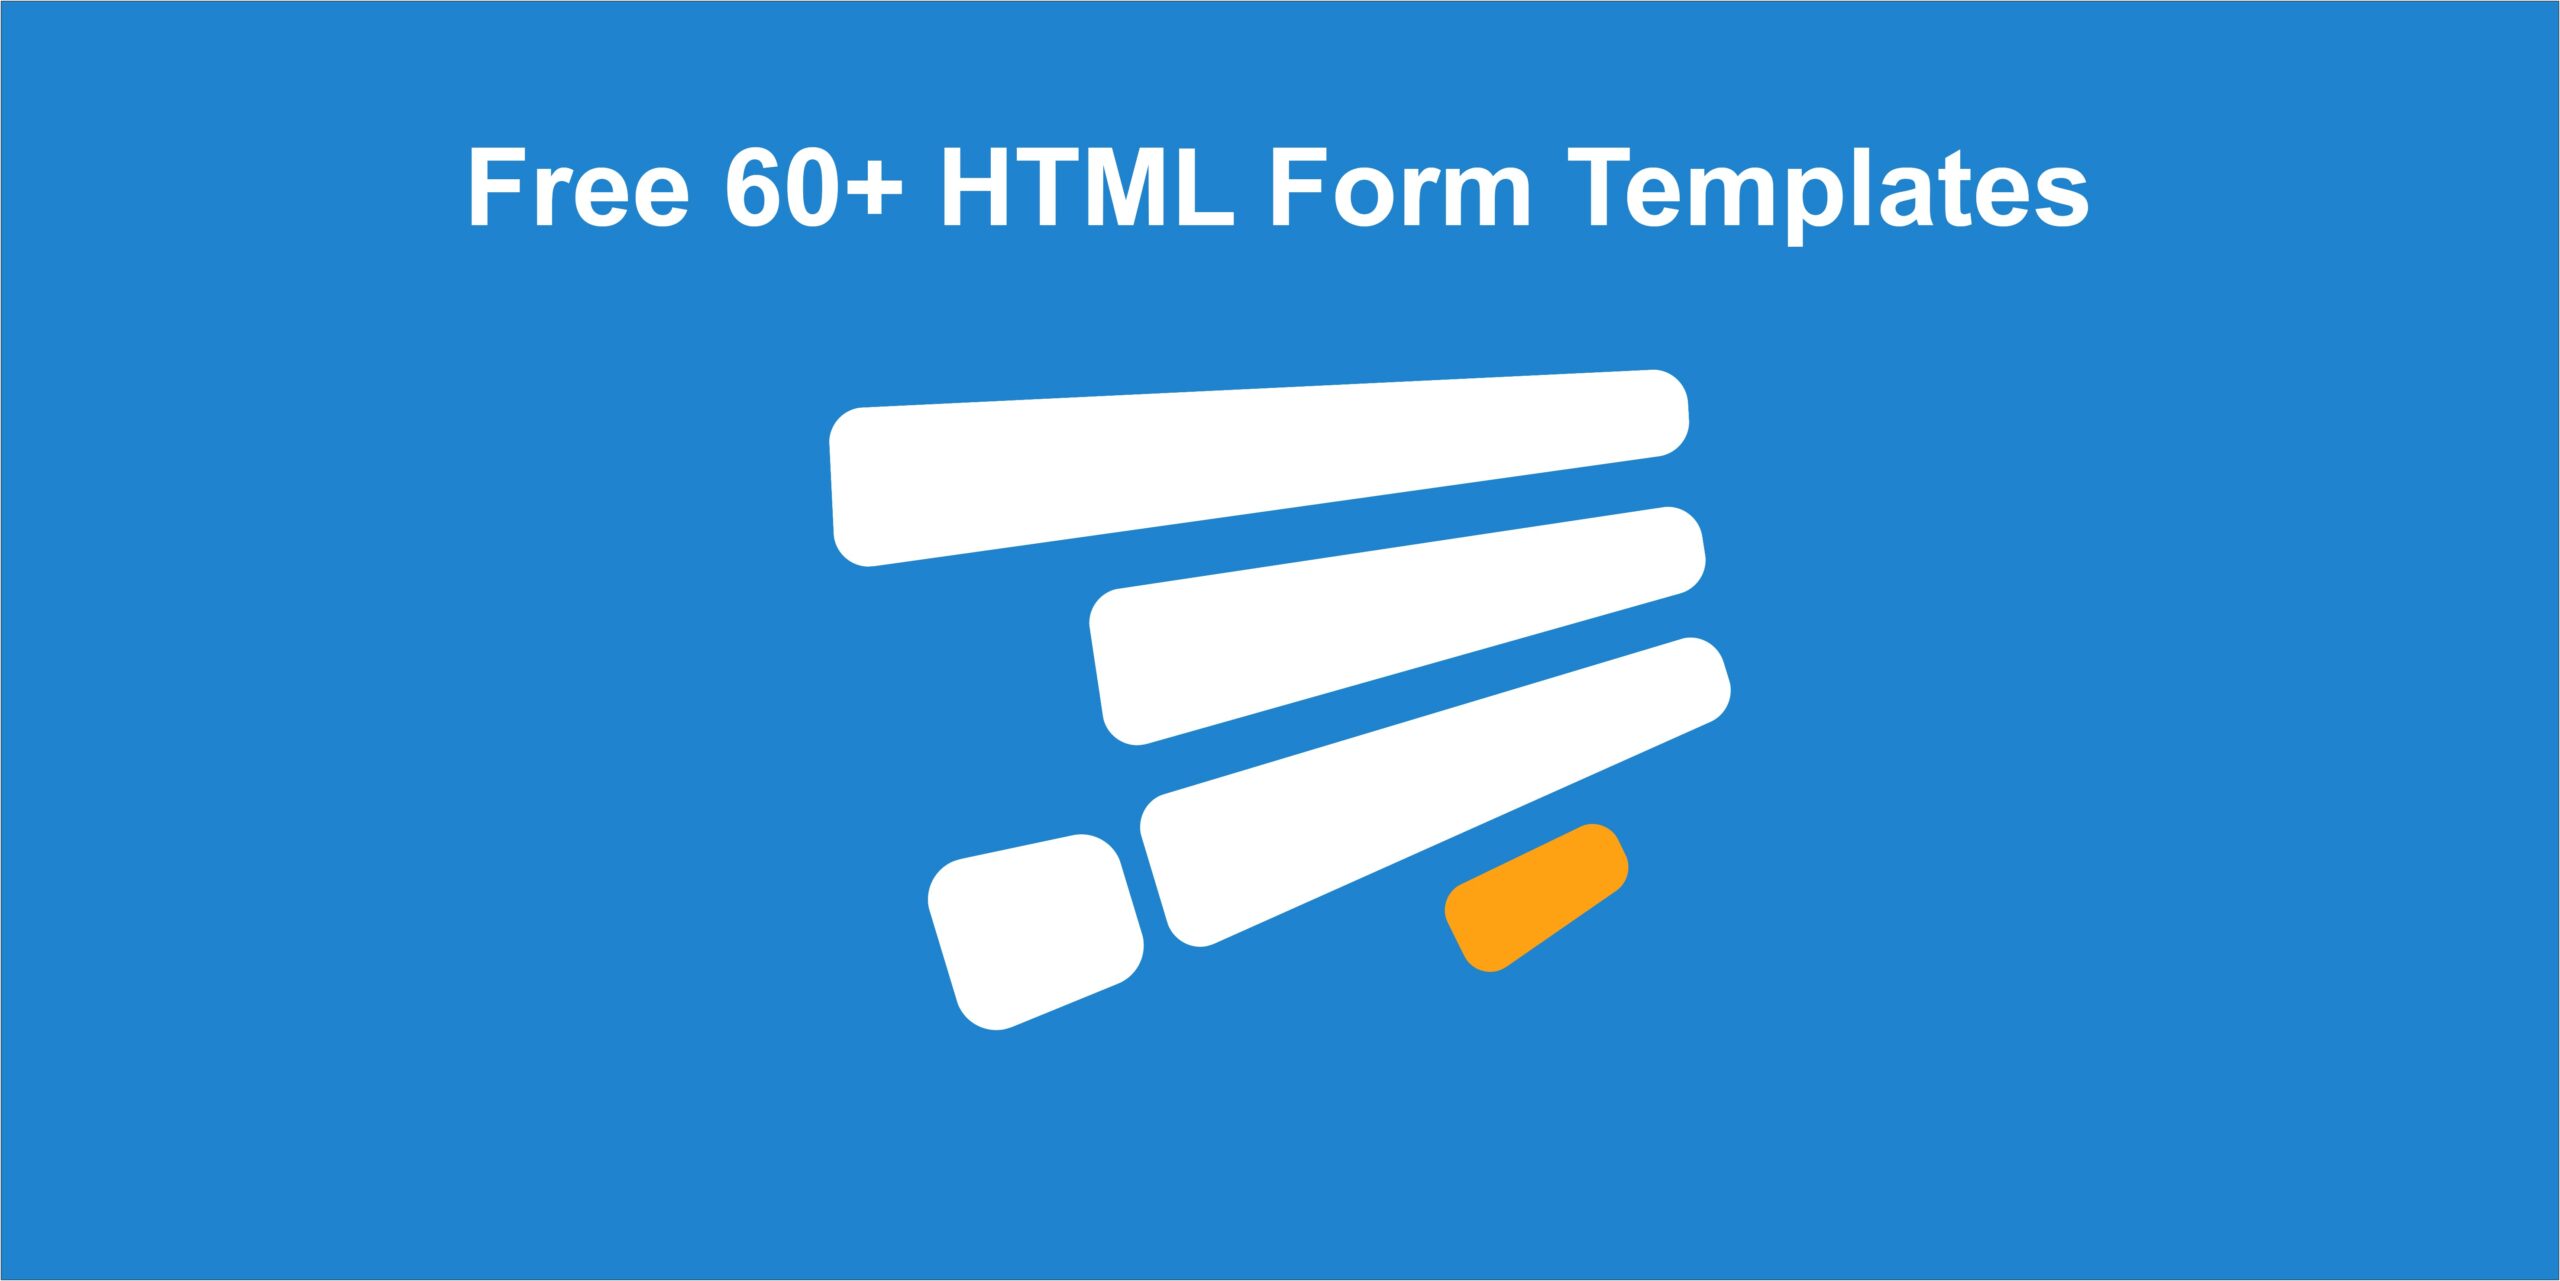 Html Application Form Templates Free Download